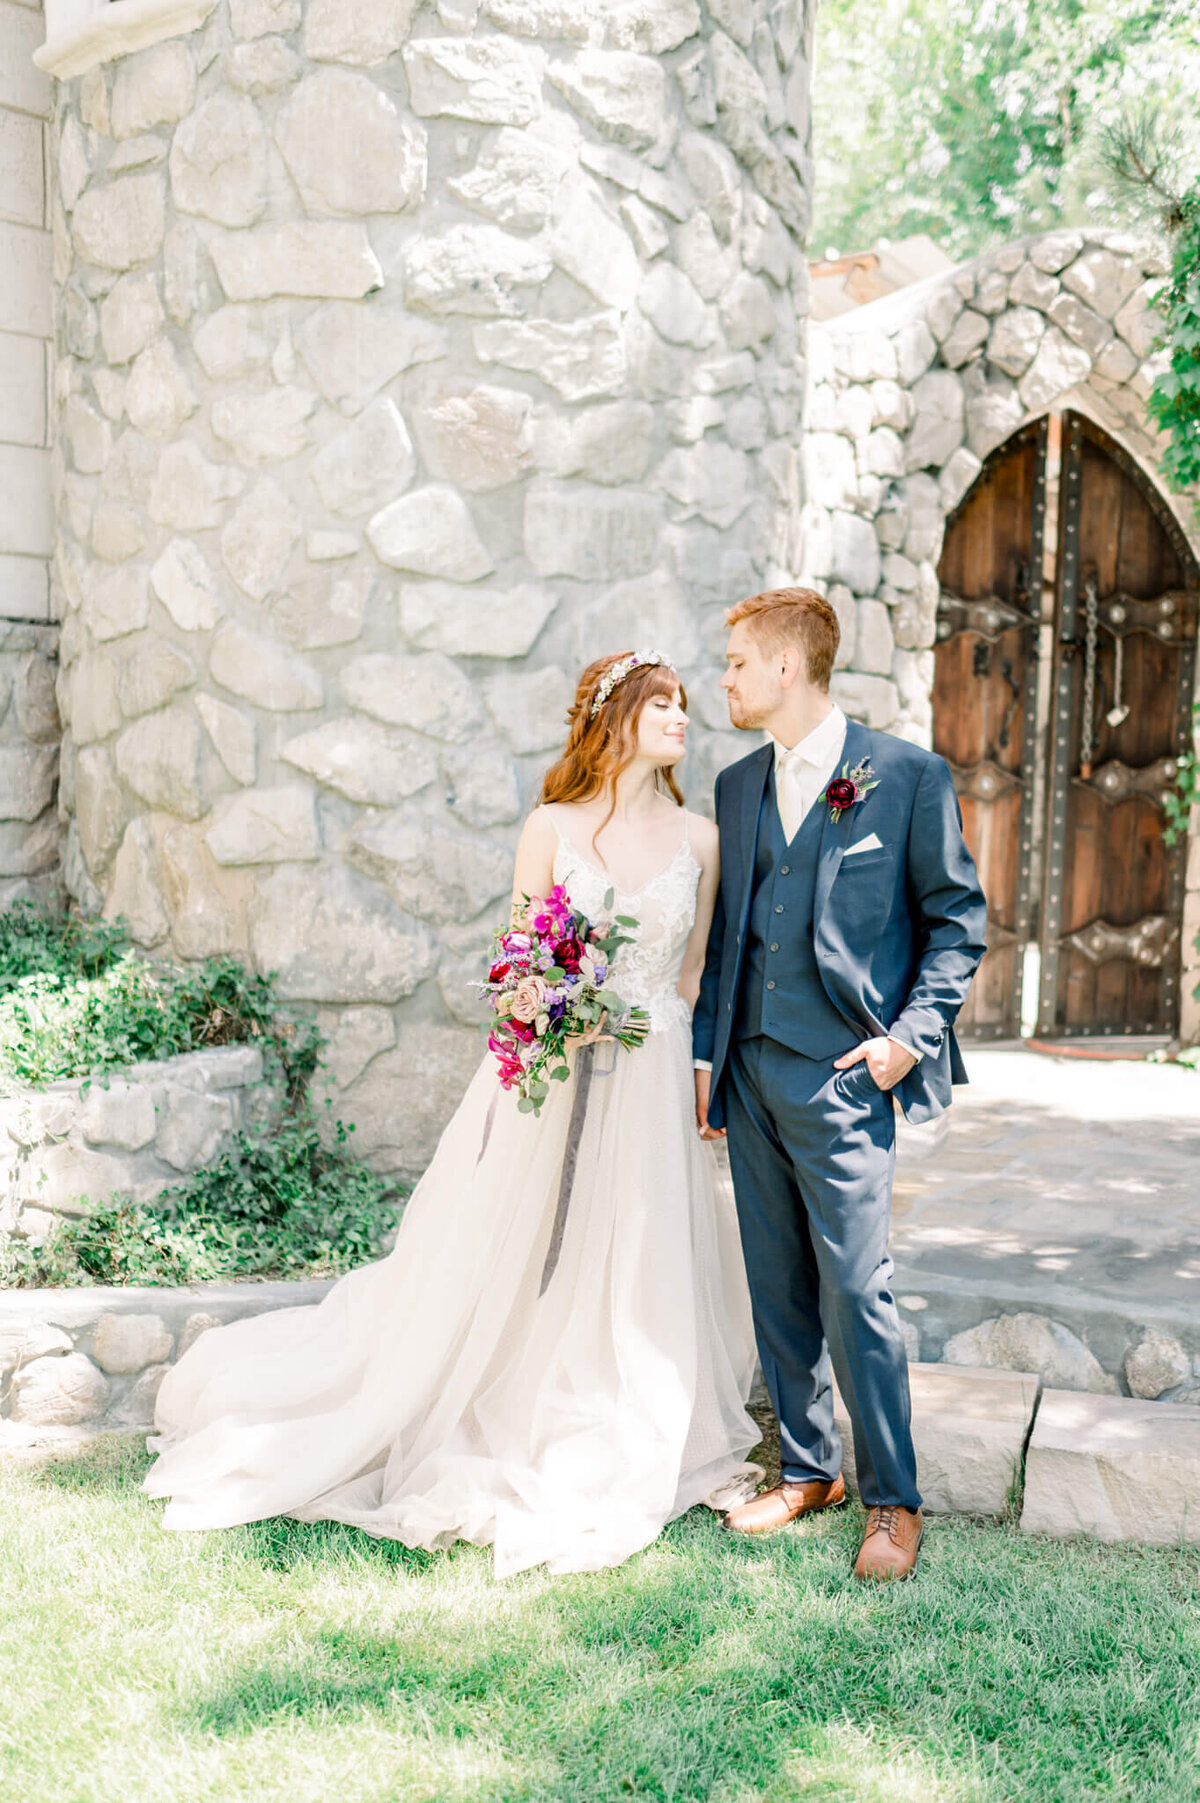 red haired bride and groom in white gown and navy suit hold bright pink flowers and look at one another